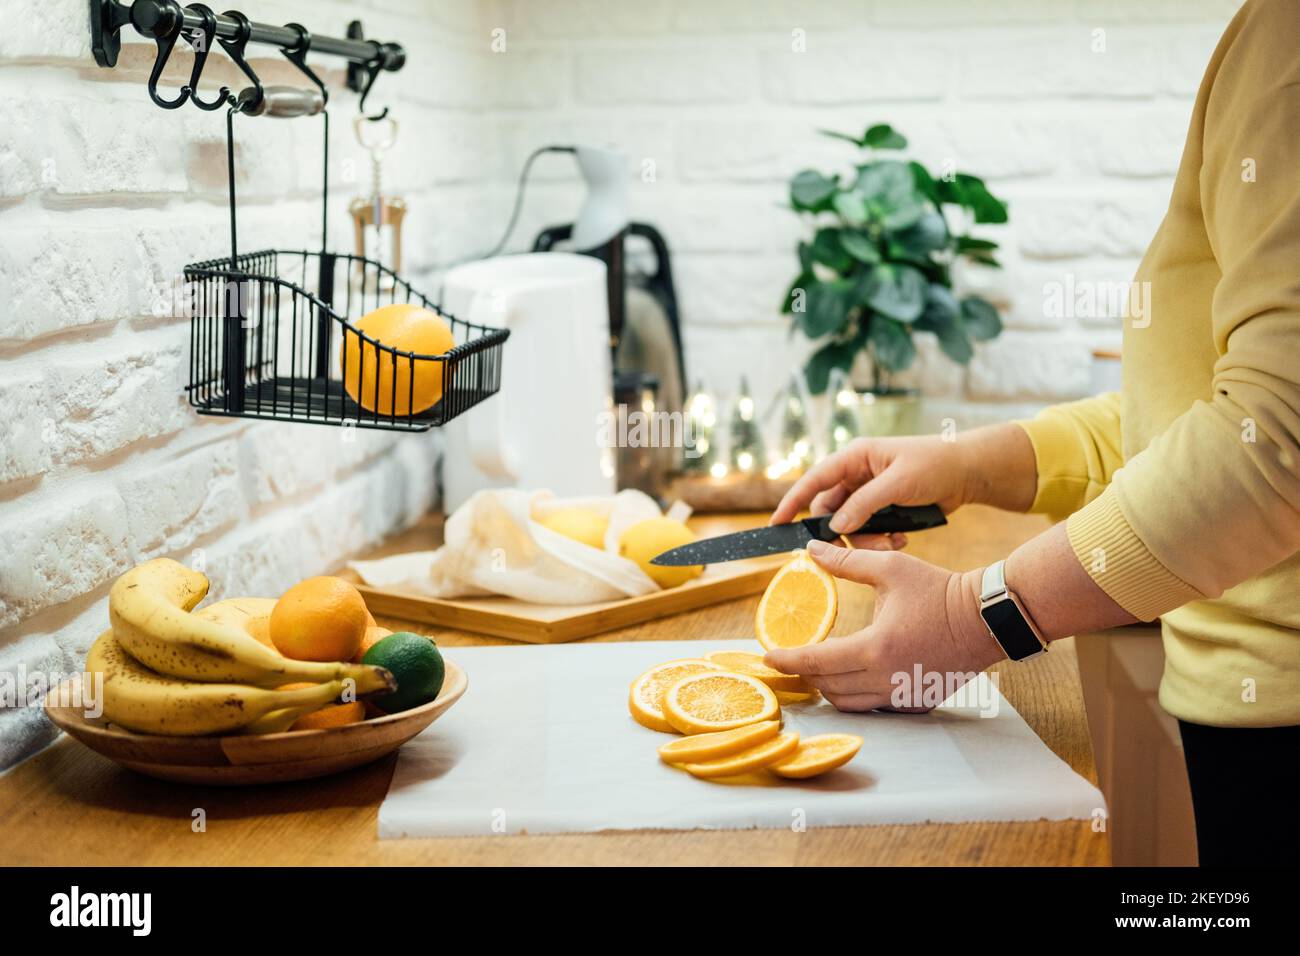 How to Dry Orange Slices for Holiday Decor. Process of Drying Orange Slices in the Oven. Woman cutting slices of orange and citrus fruits for drying Stock Photo